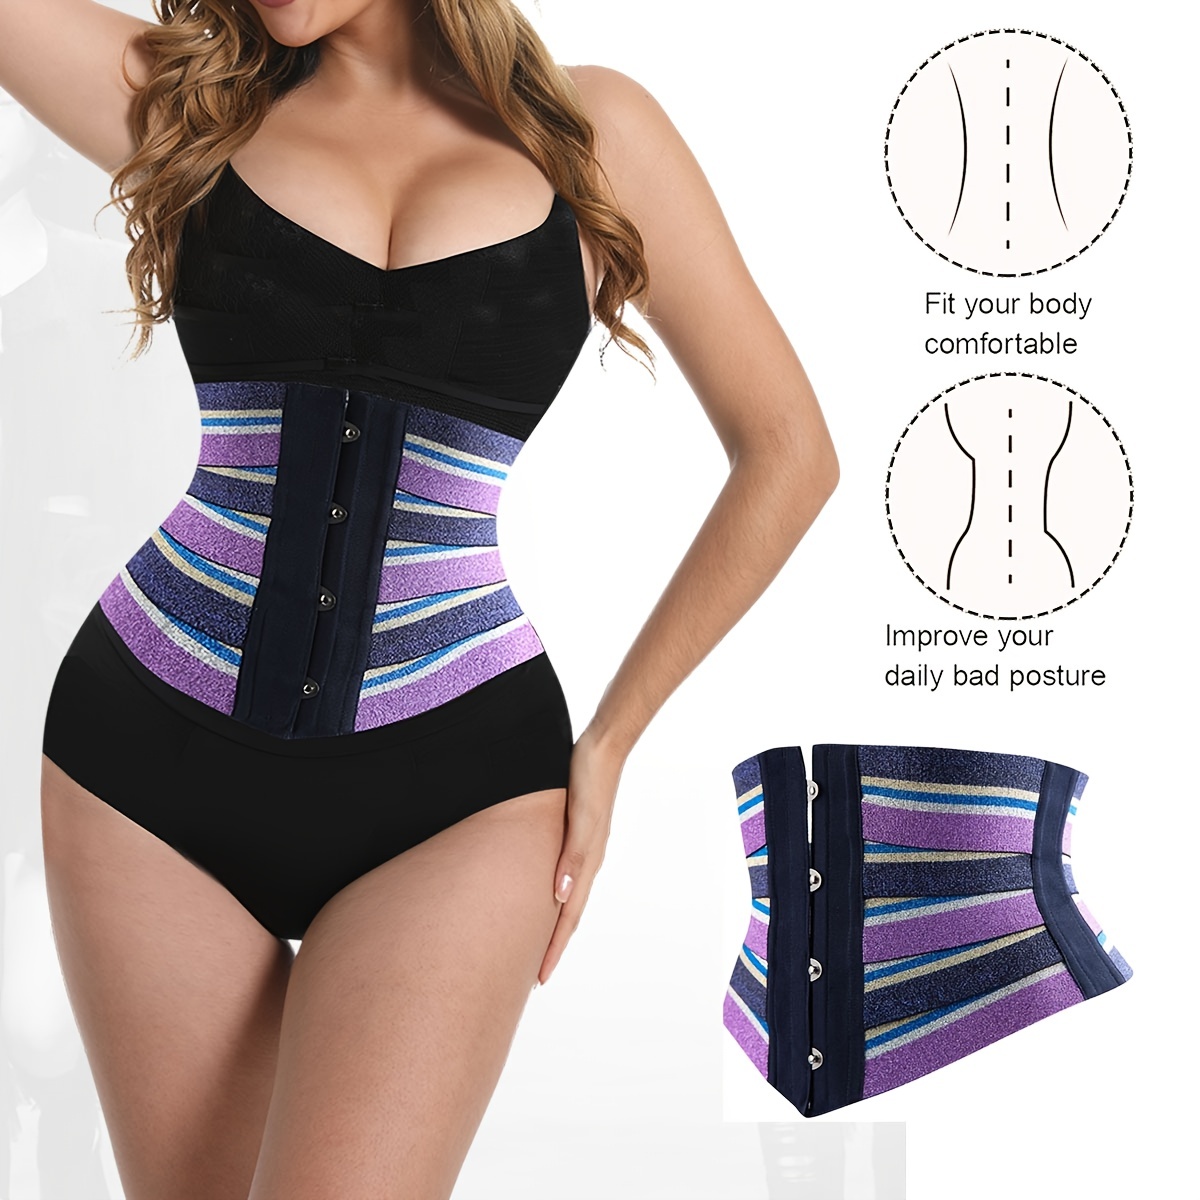 Nrvety Waist Trainer For Women Lower Belly Fat Plus Size Adjust